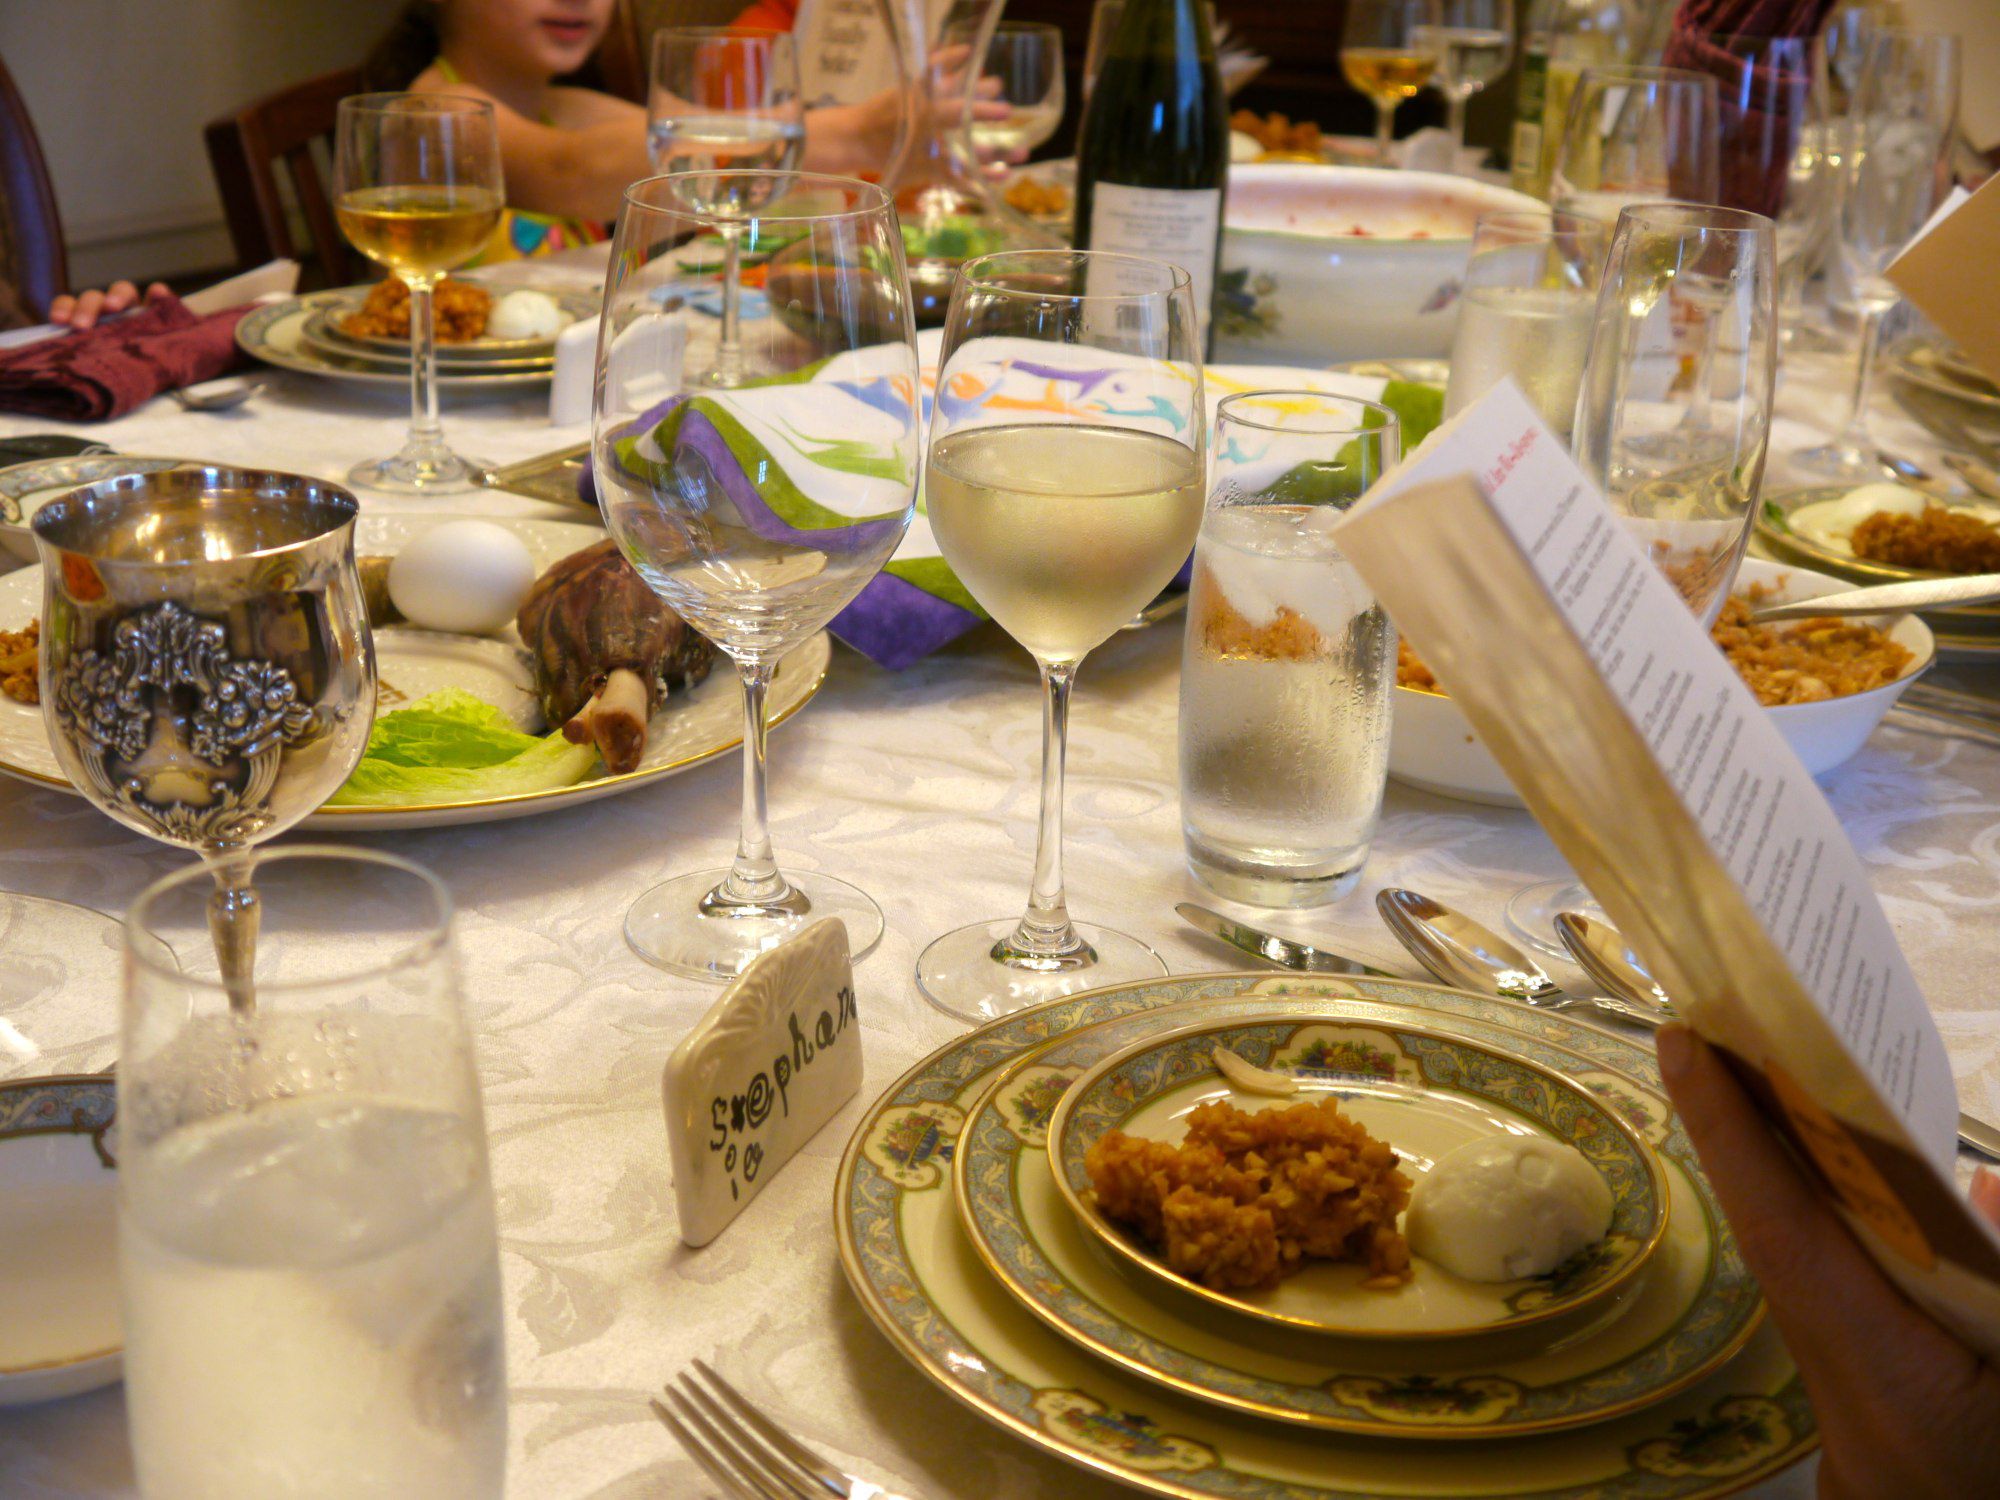 An Introduction to the Jewish Passover Festival